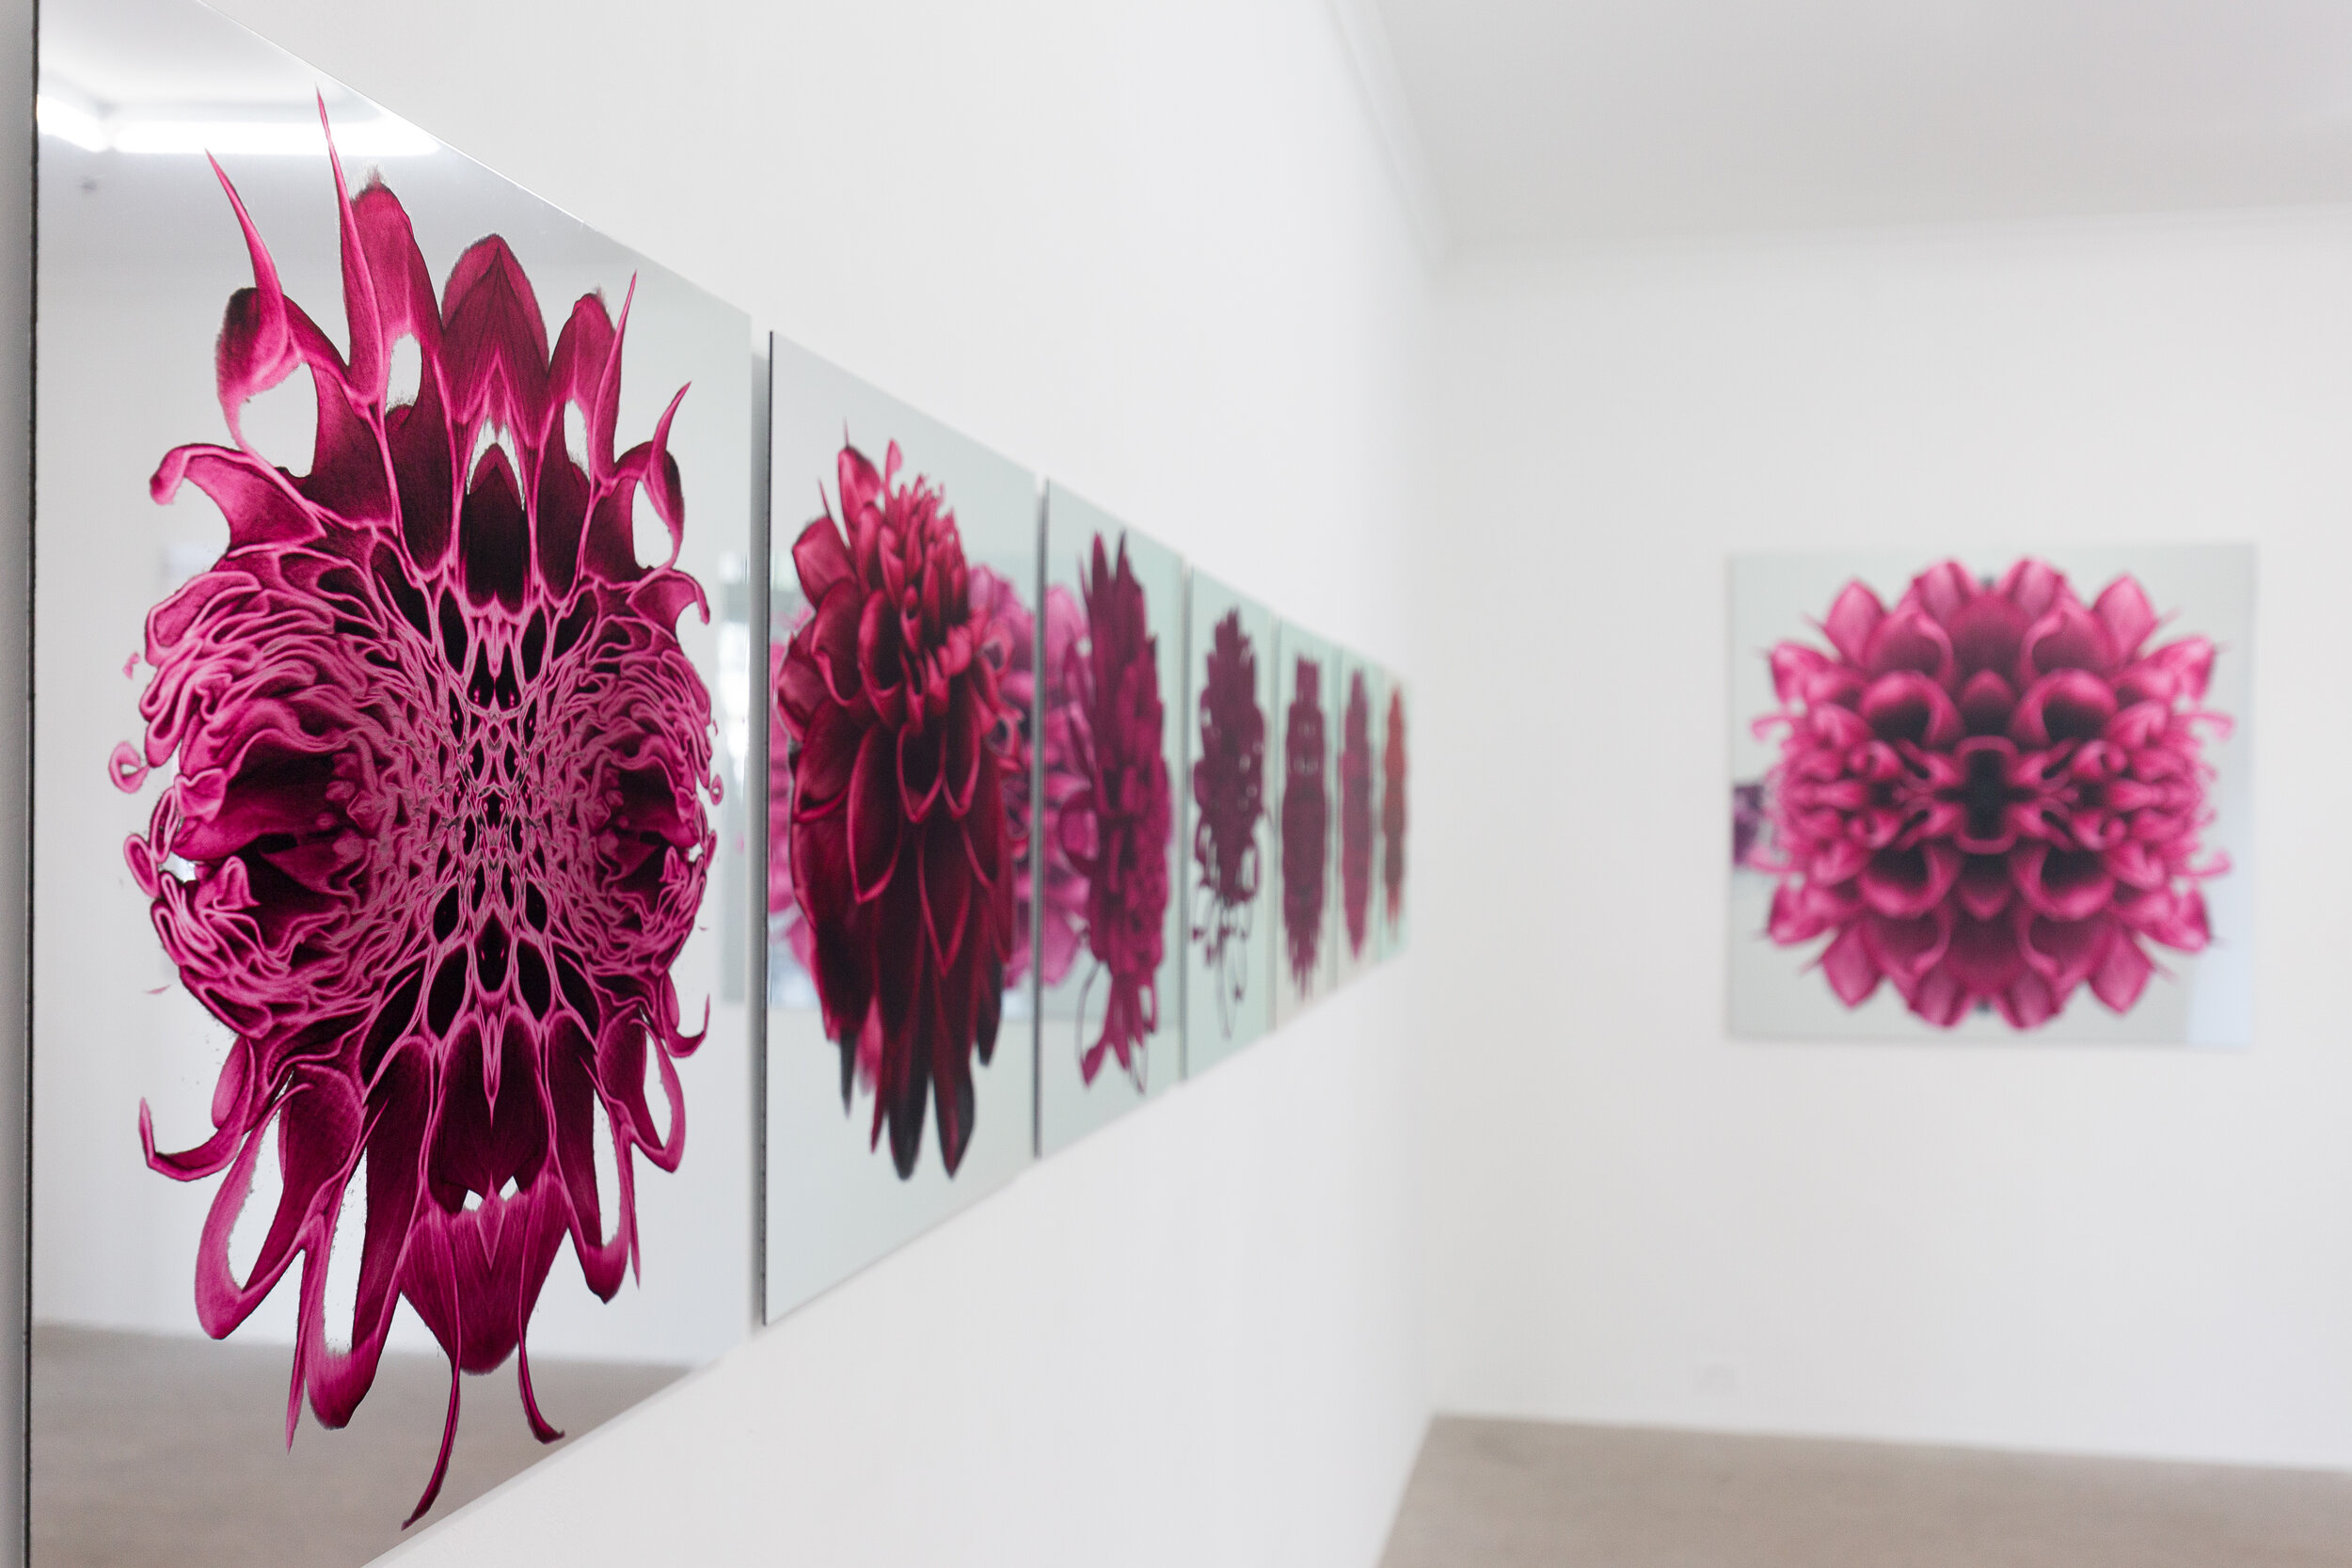  Erica Seccombe, BIG PINK 2019, installation view at Galerie pompom. Photo: Docqment 